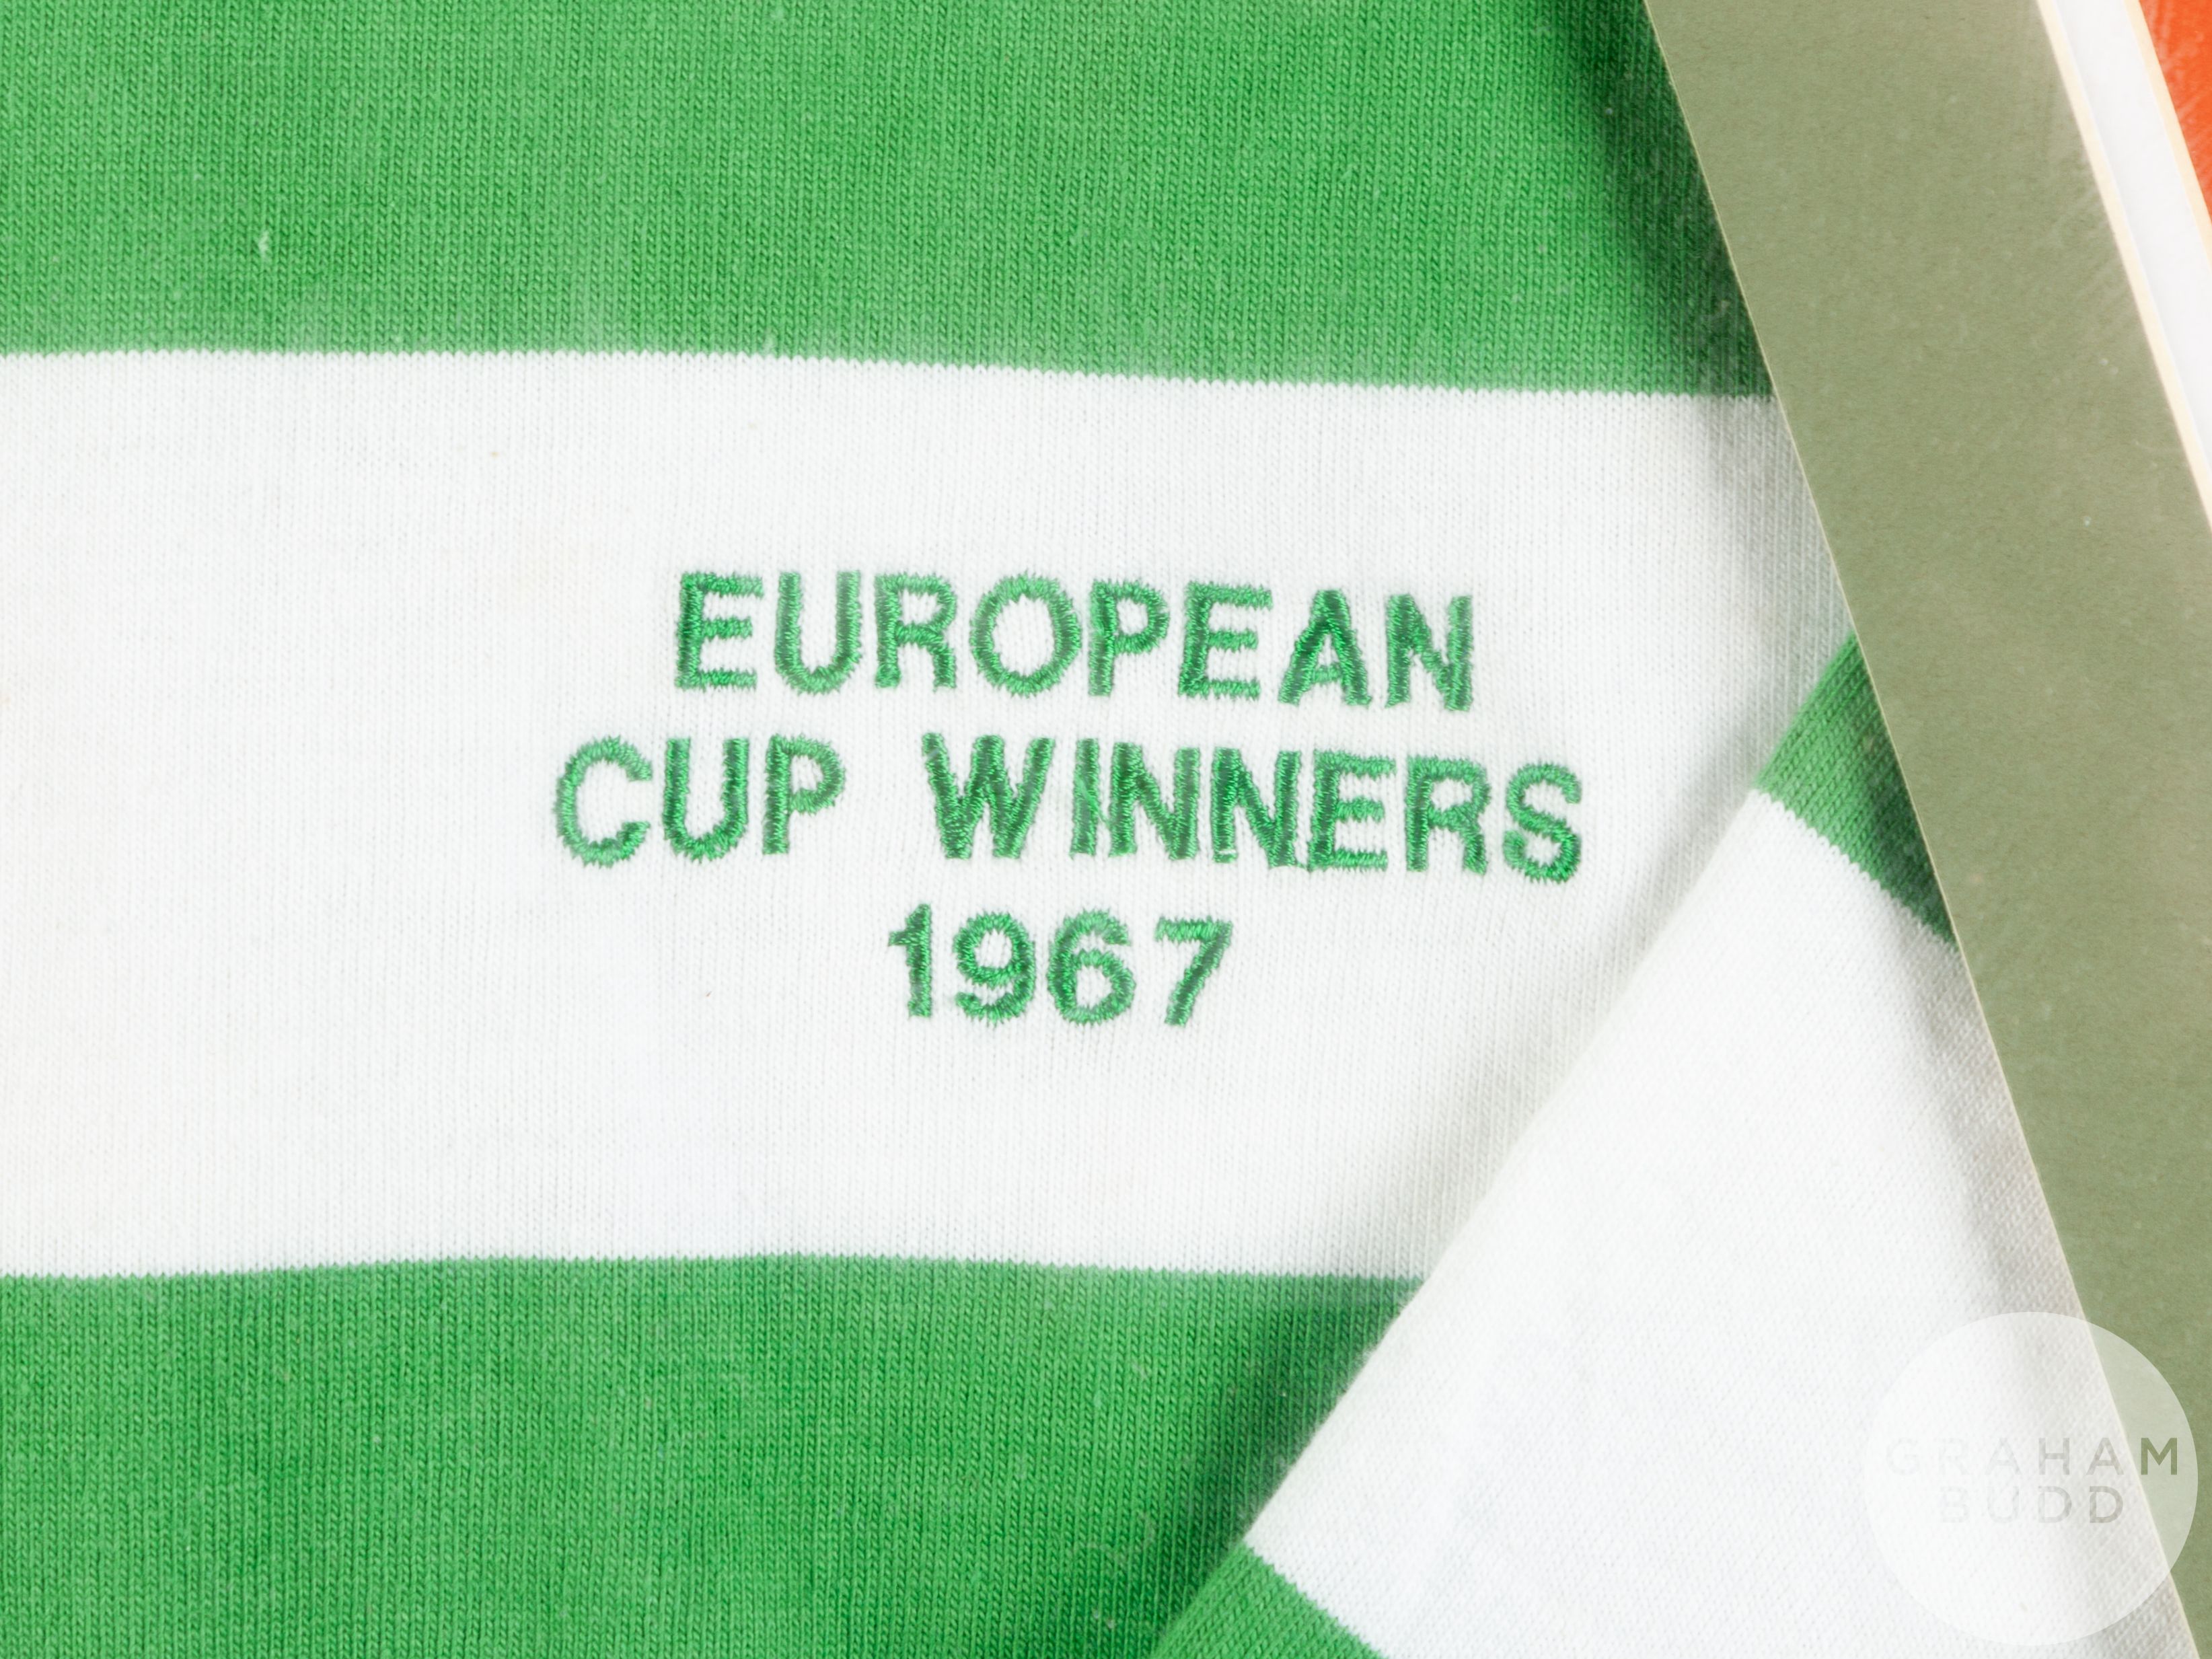 Celtic commemorative 1967 green and white shirt - Image 2 of 4